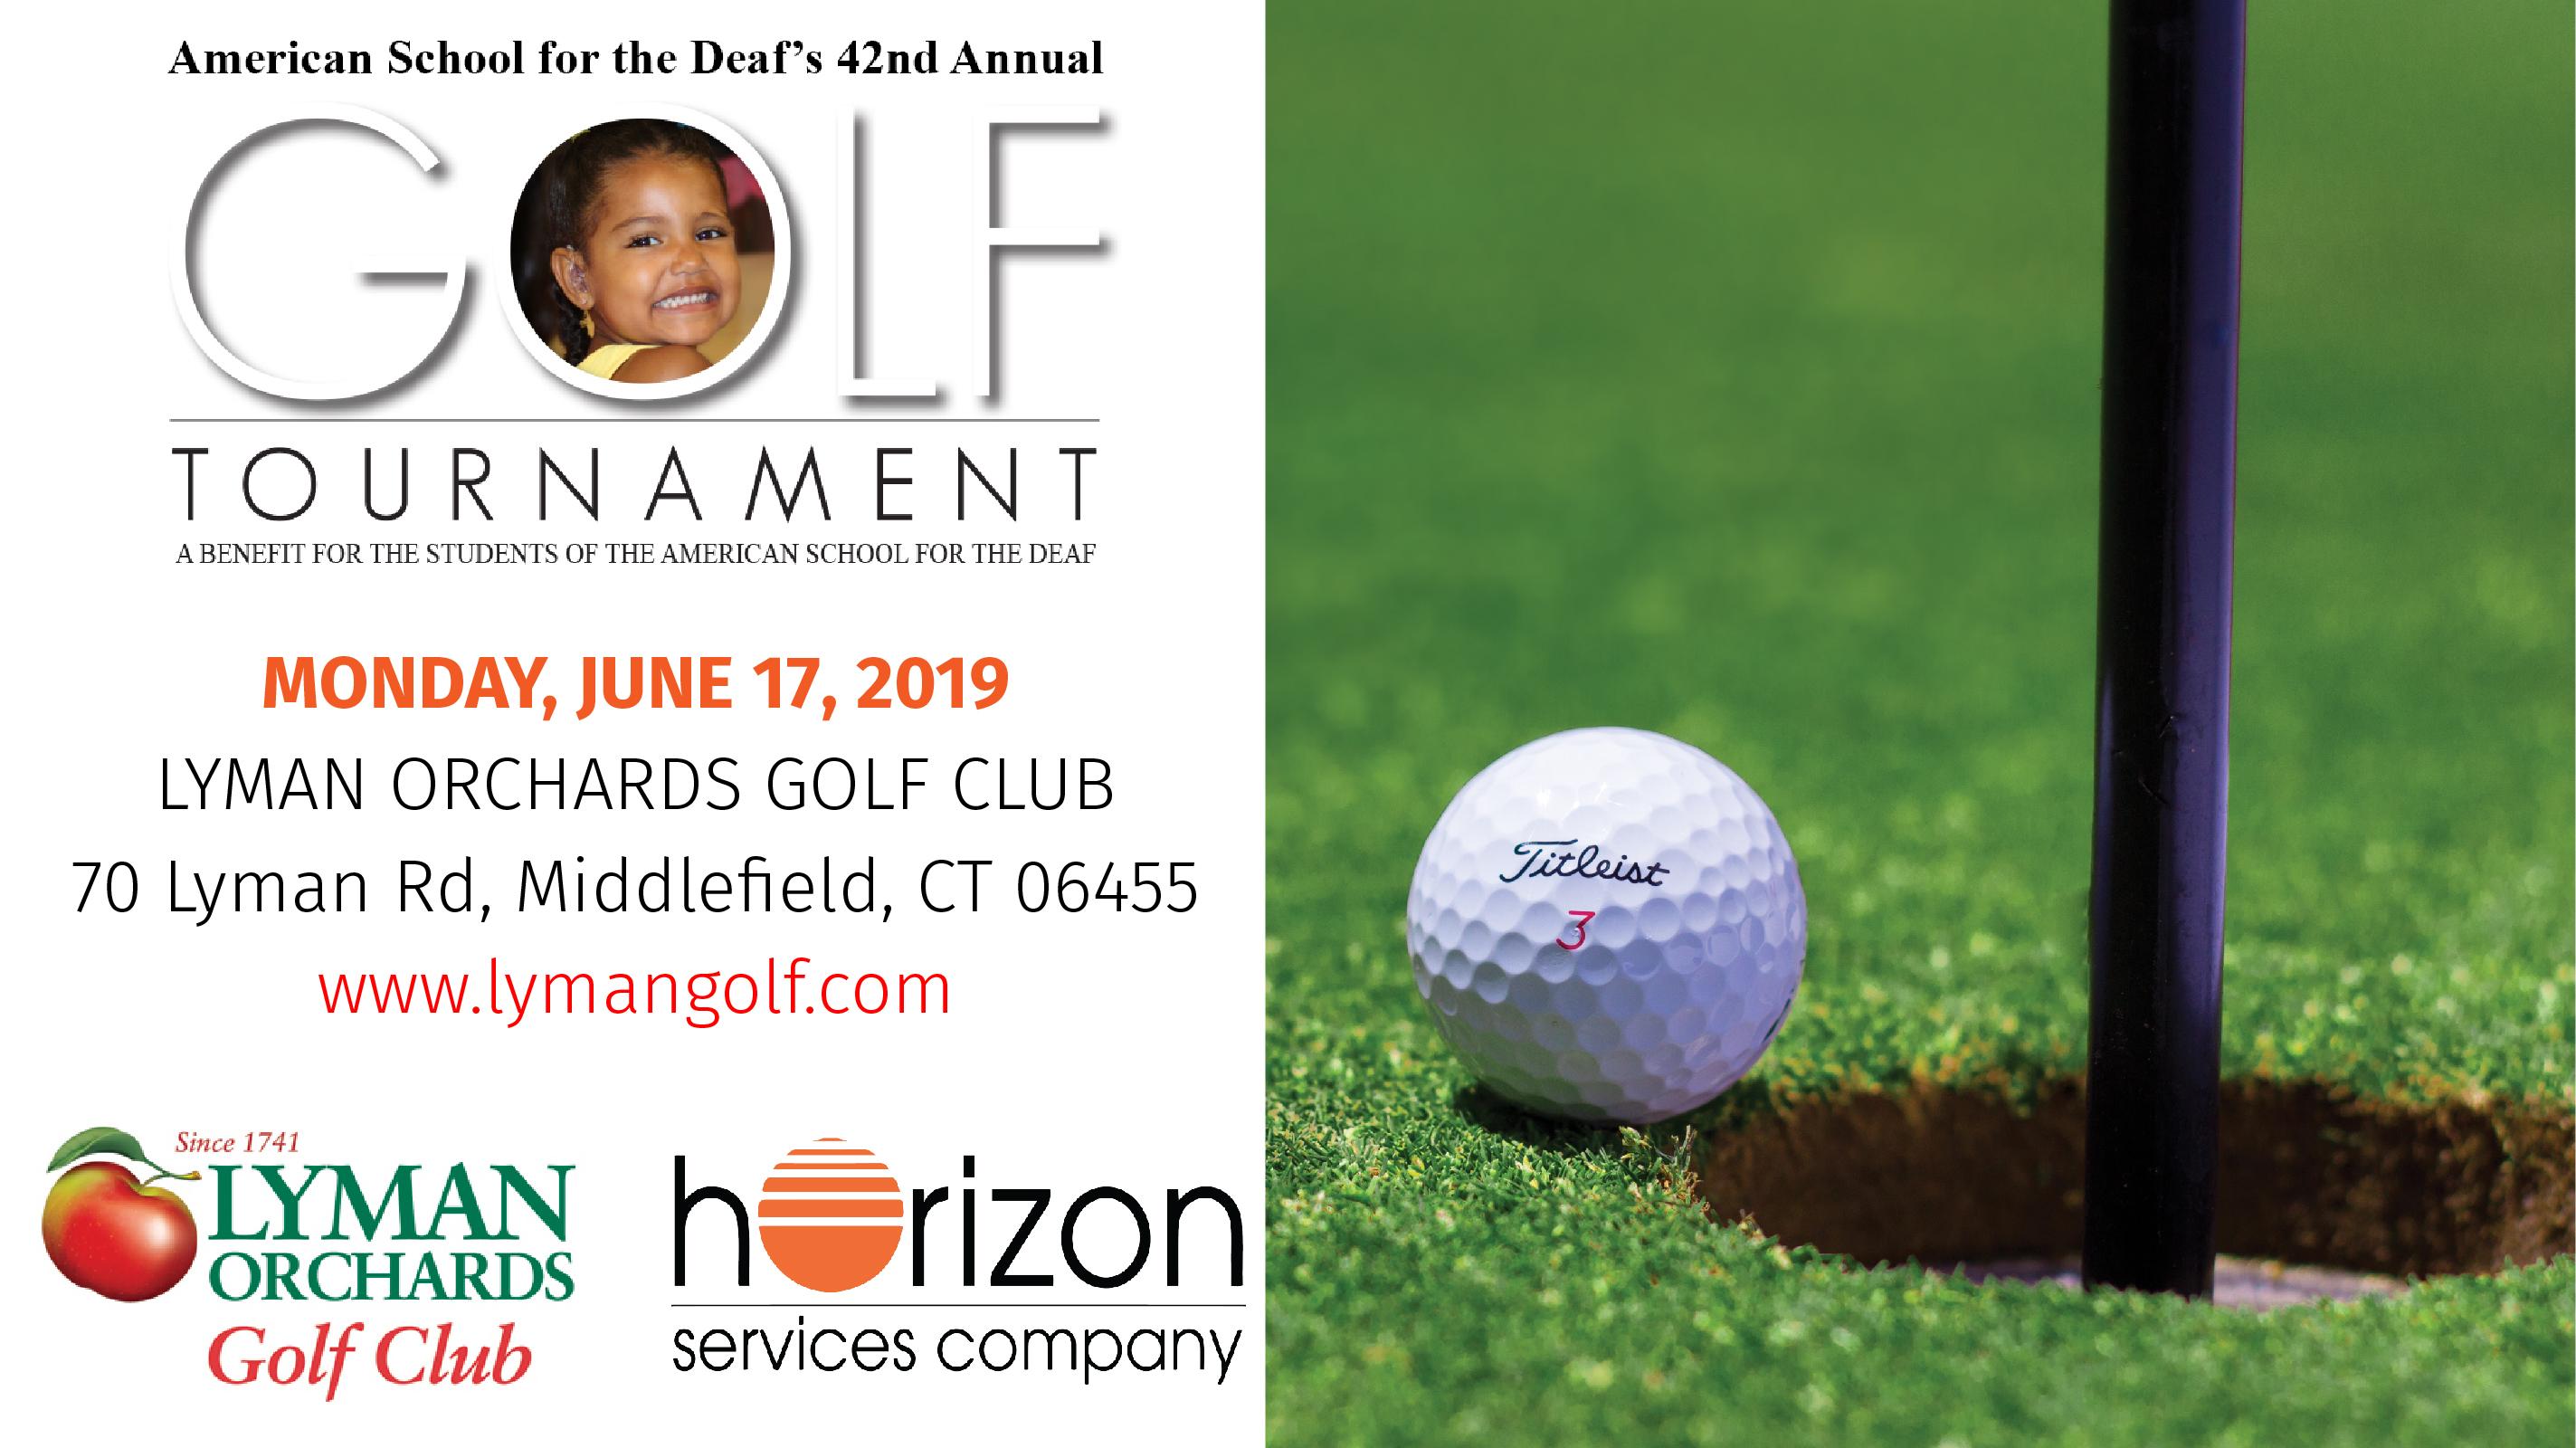 American School for the Dear's 42nd Annual Golf Tournament